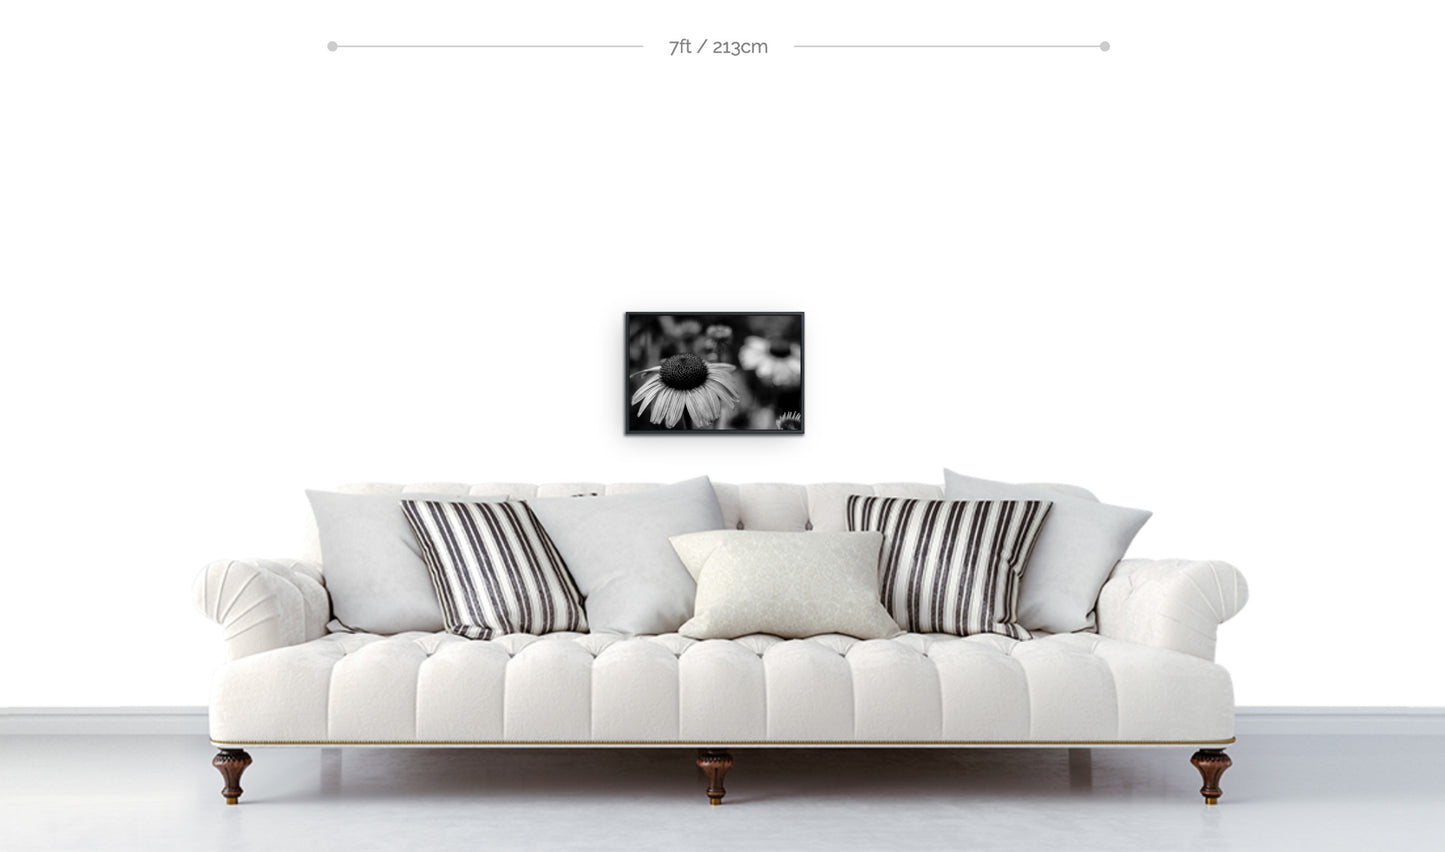 Flowers photograph framed black and white print echinacea cone flower in foreground focus displayed above sofa